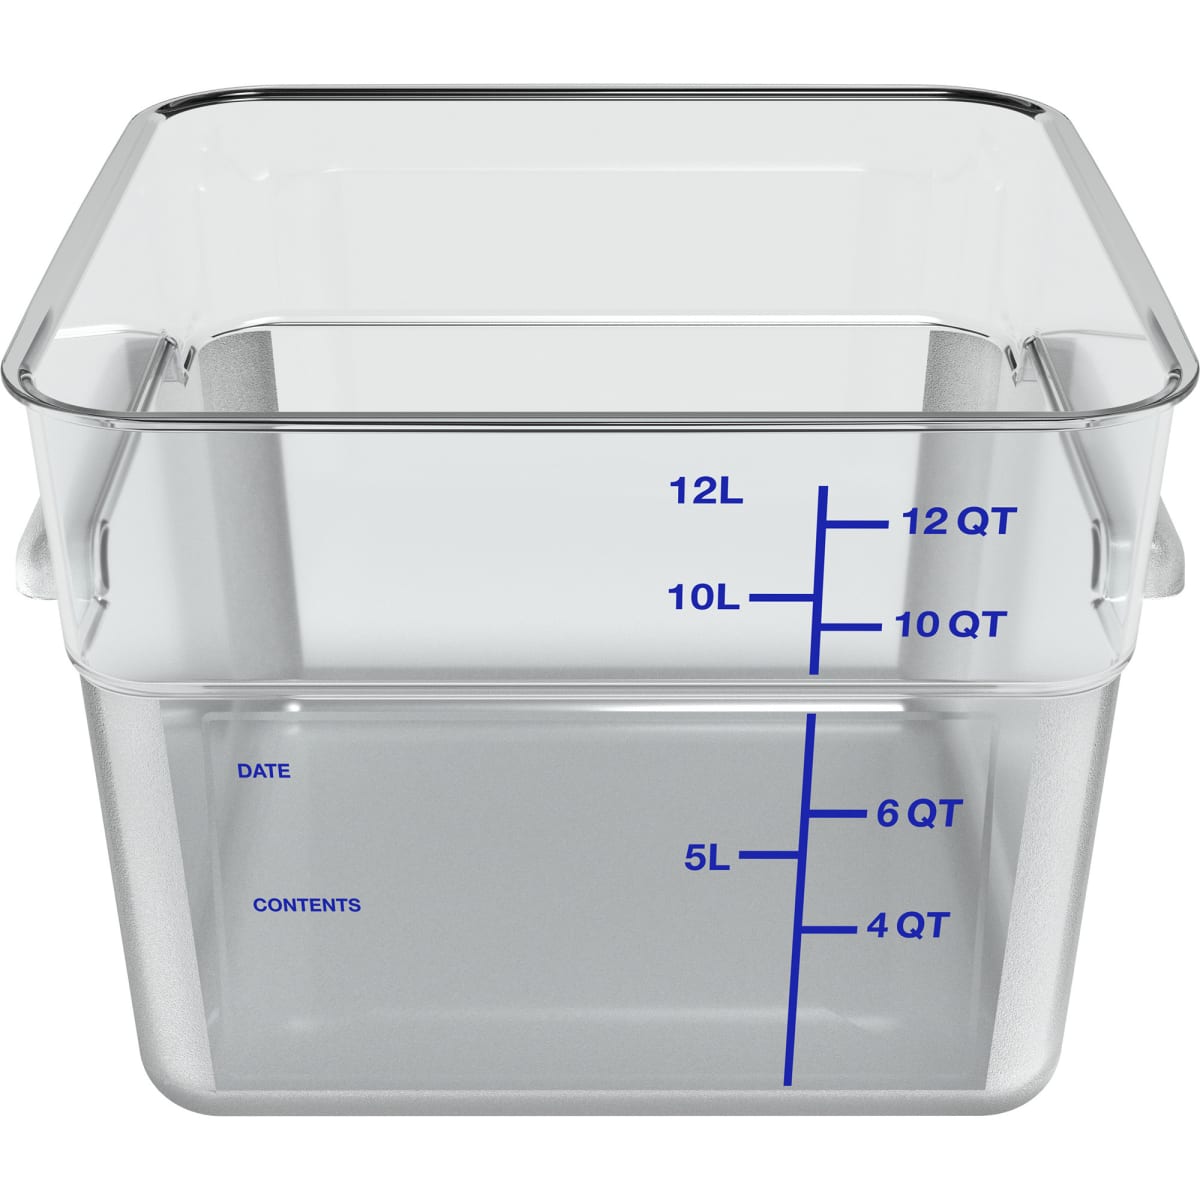 1195207 - Squares Polycarbonate Food Storage Container 6 qt - Clear